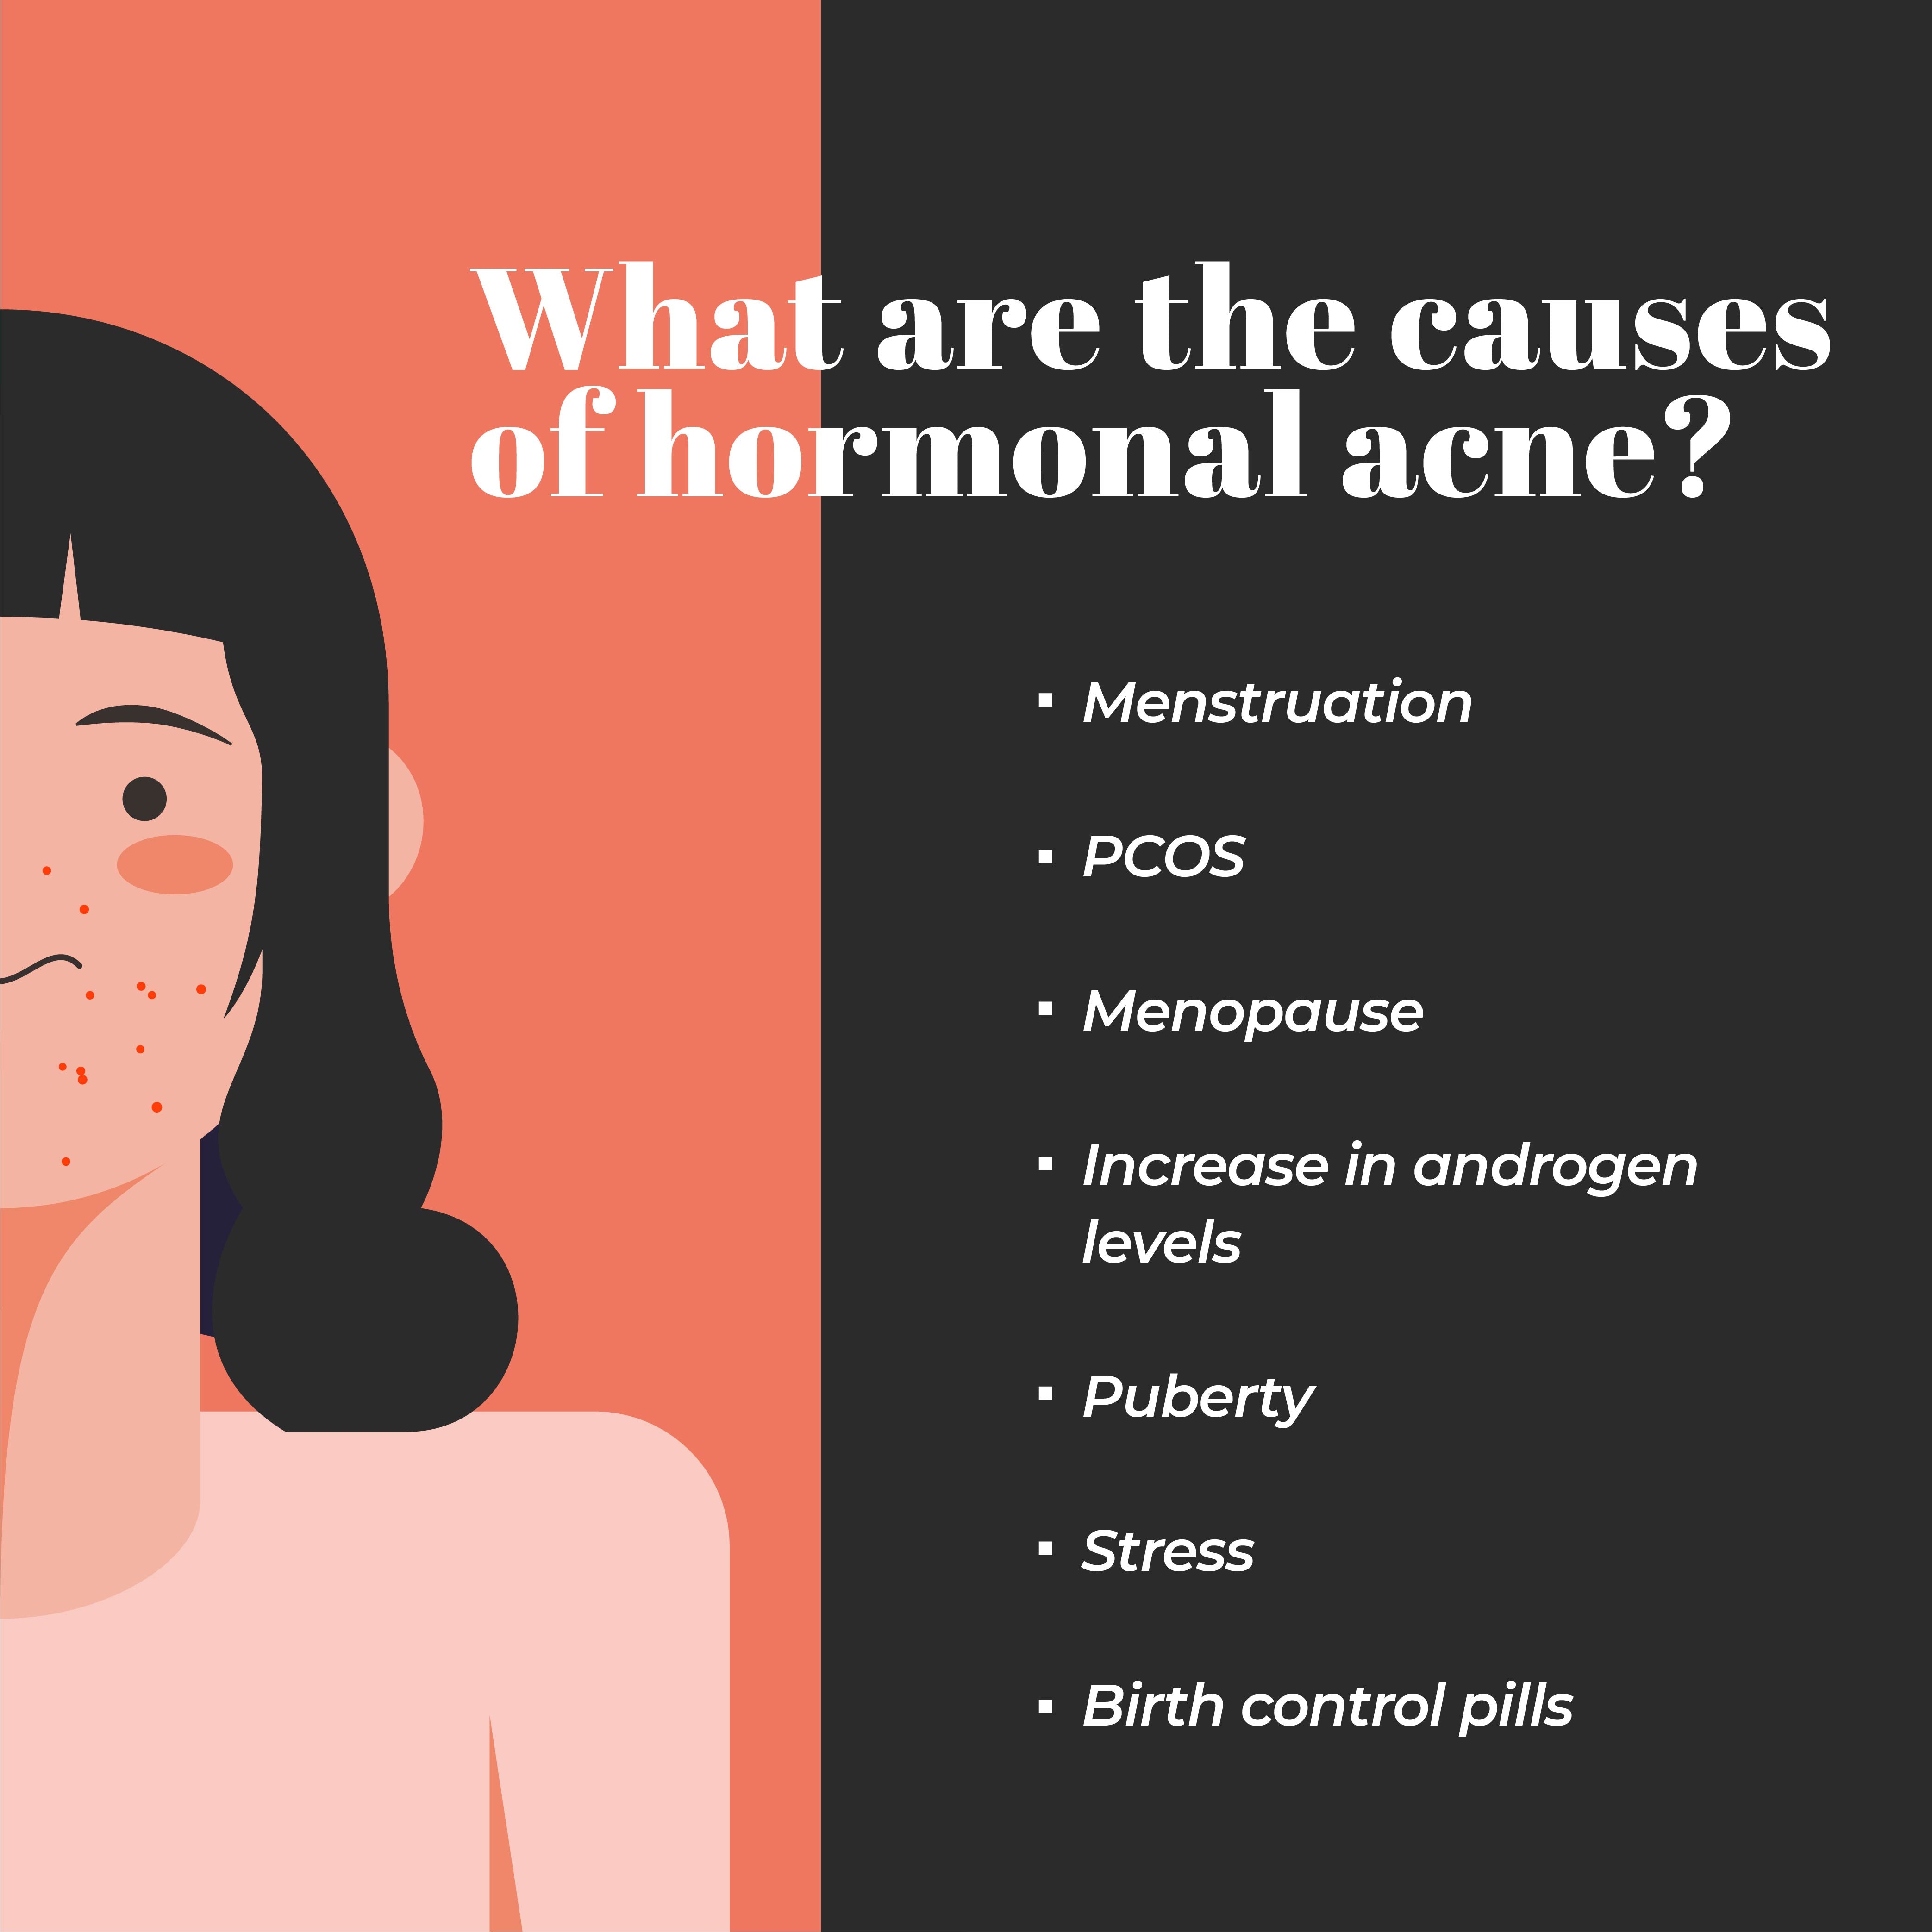 This is an image of the reasons of hormonal acne